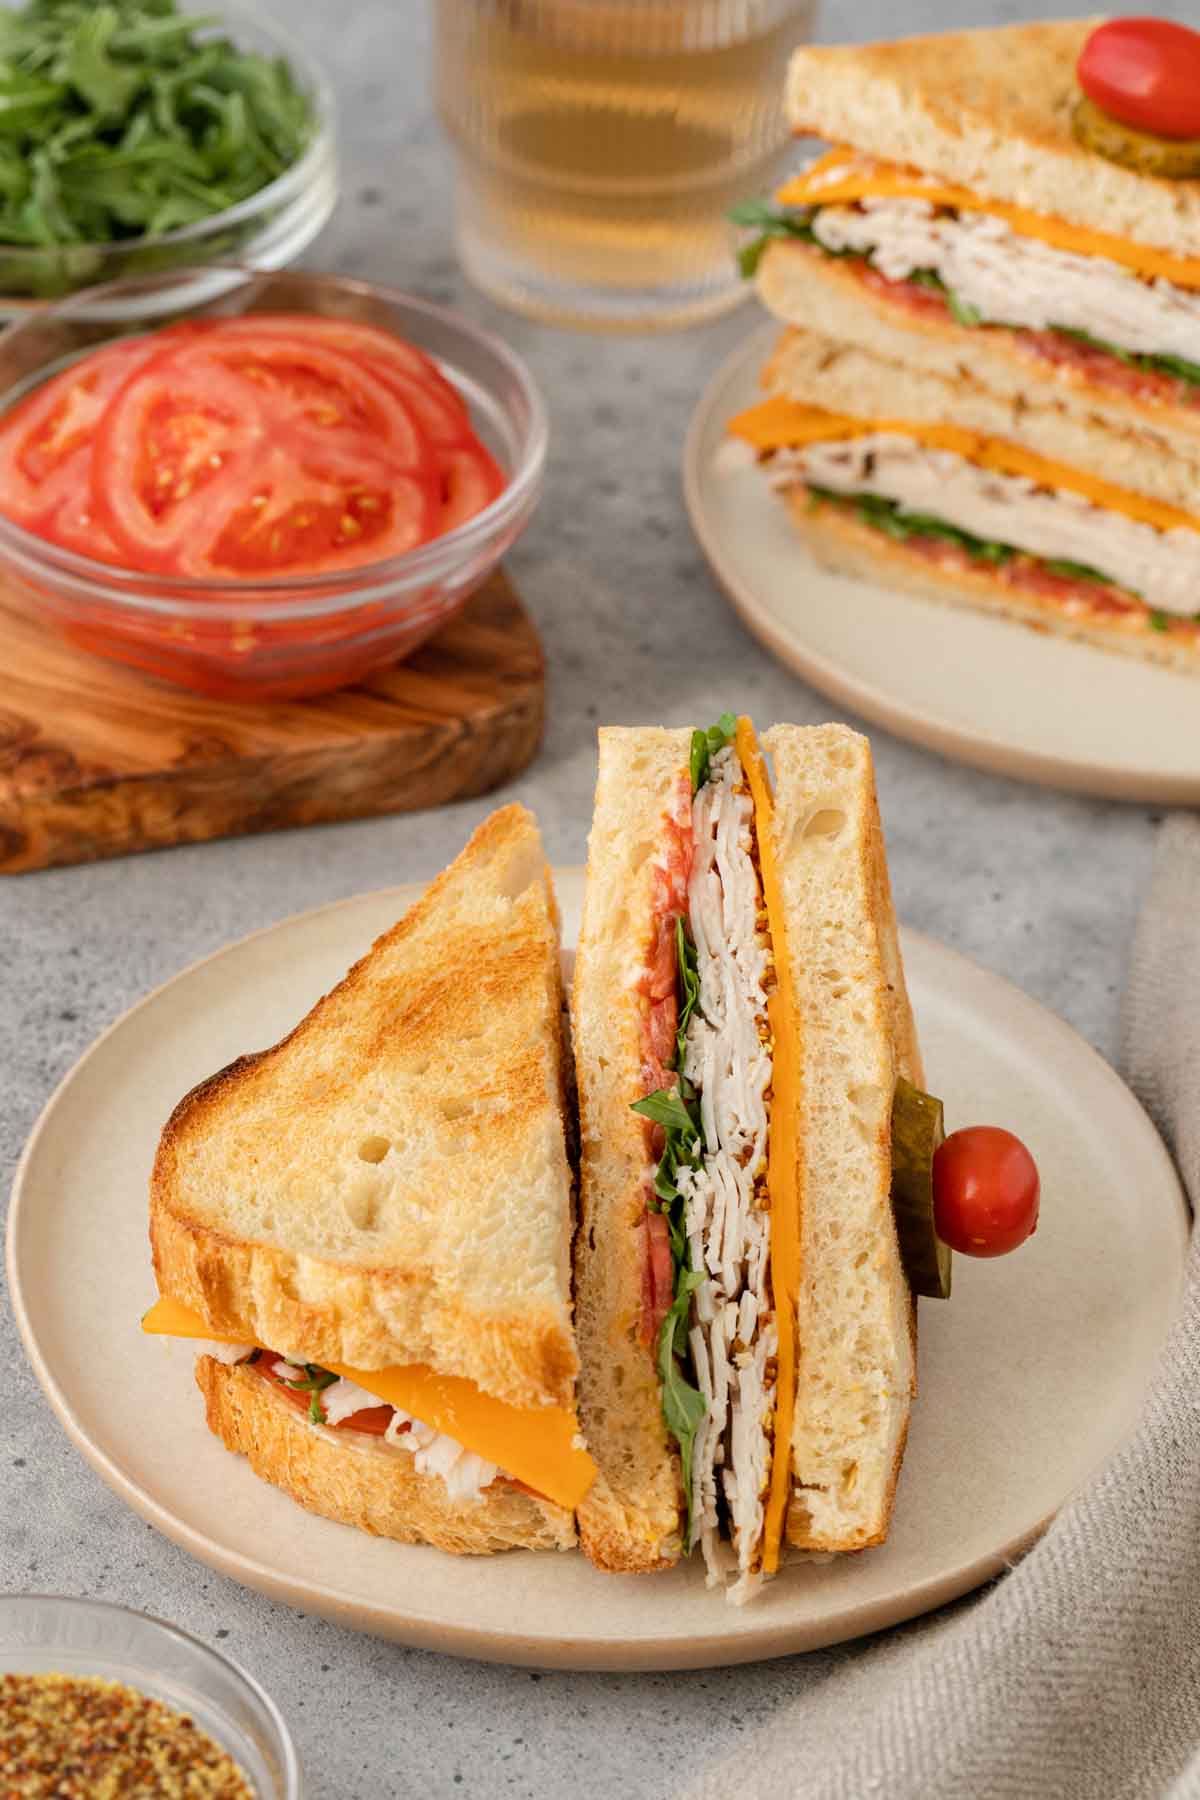 Turkey Sandwich halves on plate. One half laying flavor, other half propped up on flat half. More halves stacked on plate and bowl of tomatoes in background.